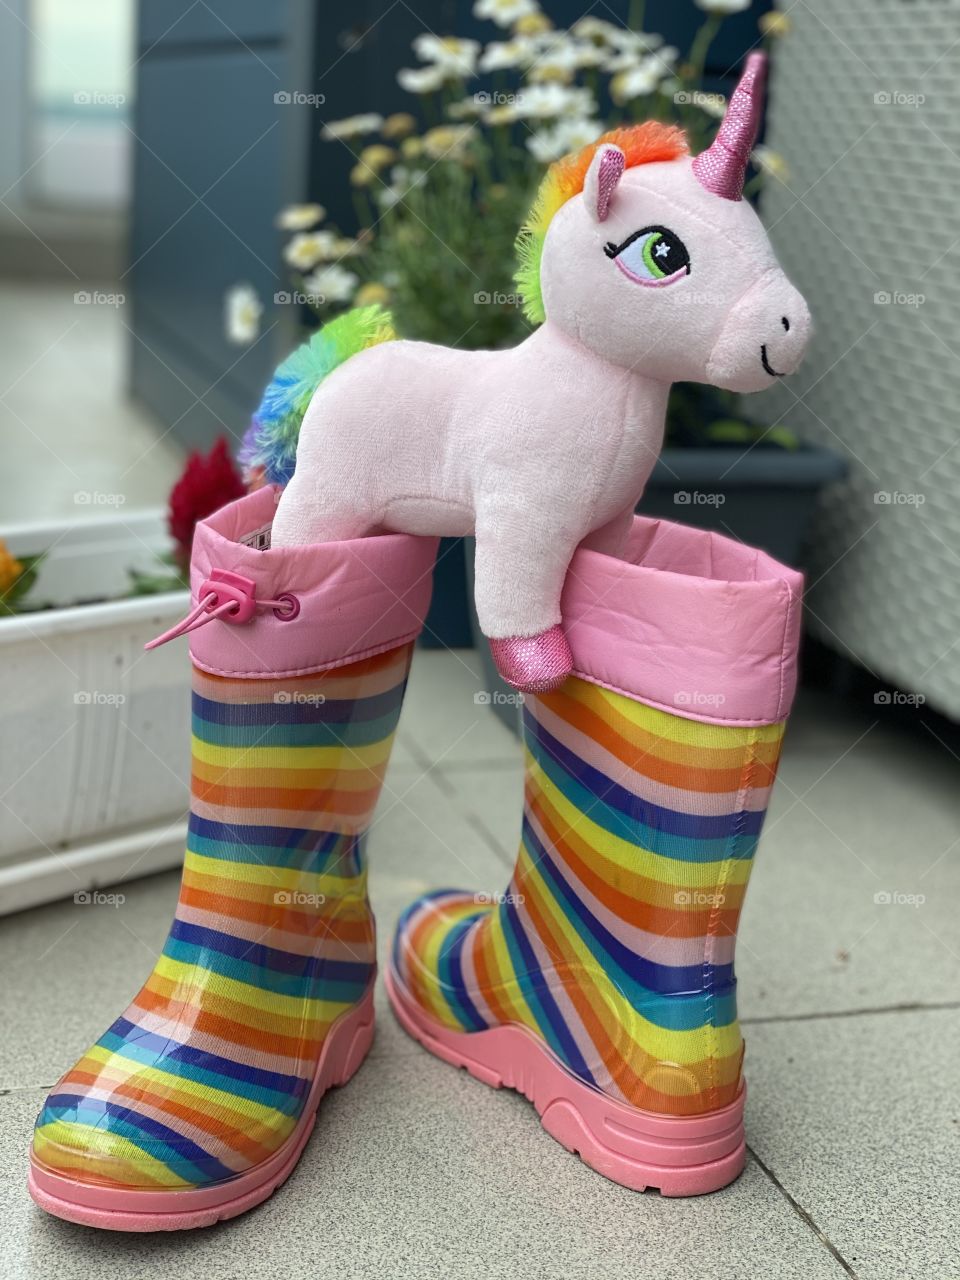 A unicorn came out of the boot